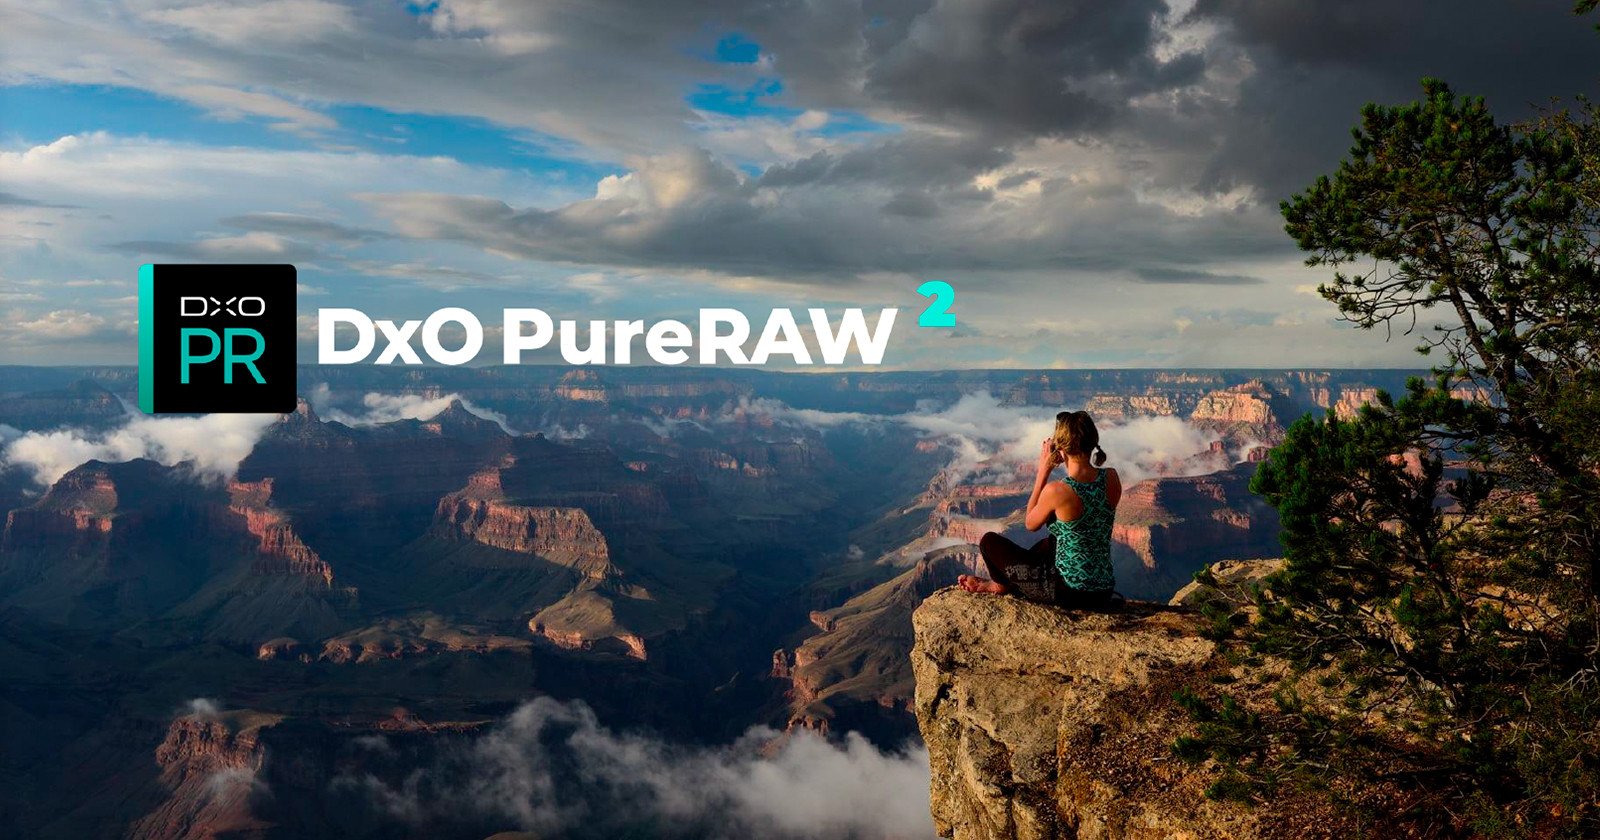 DxO Launches PureRAW 2: Enhanced Workflow Options and Fuji Support